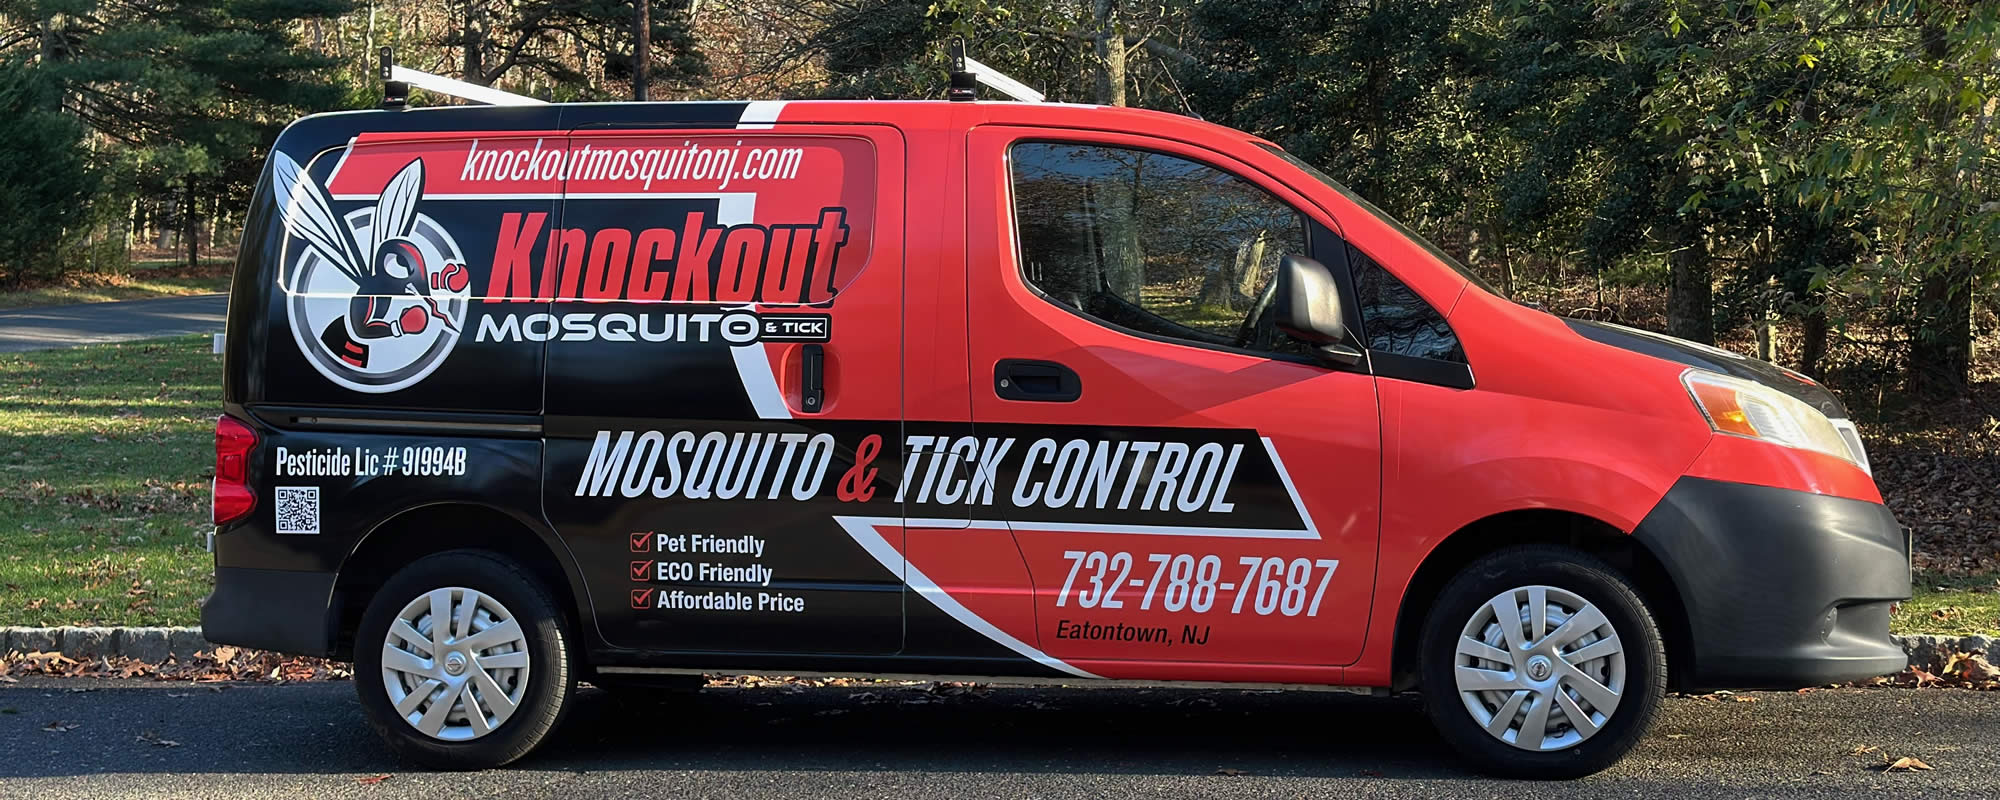 Red Bank Mosquito Control Services